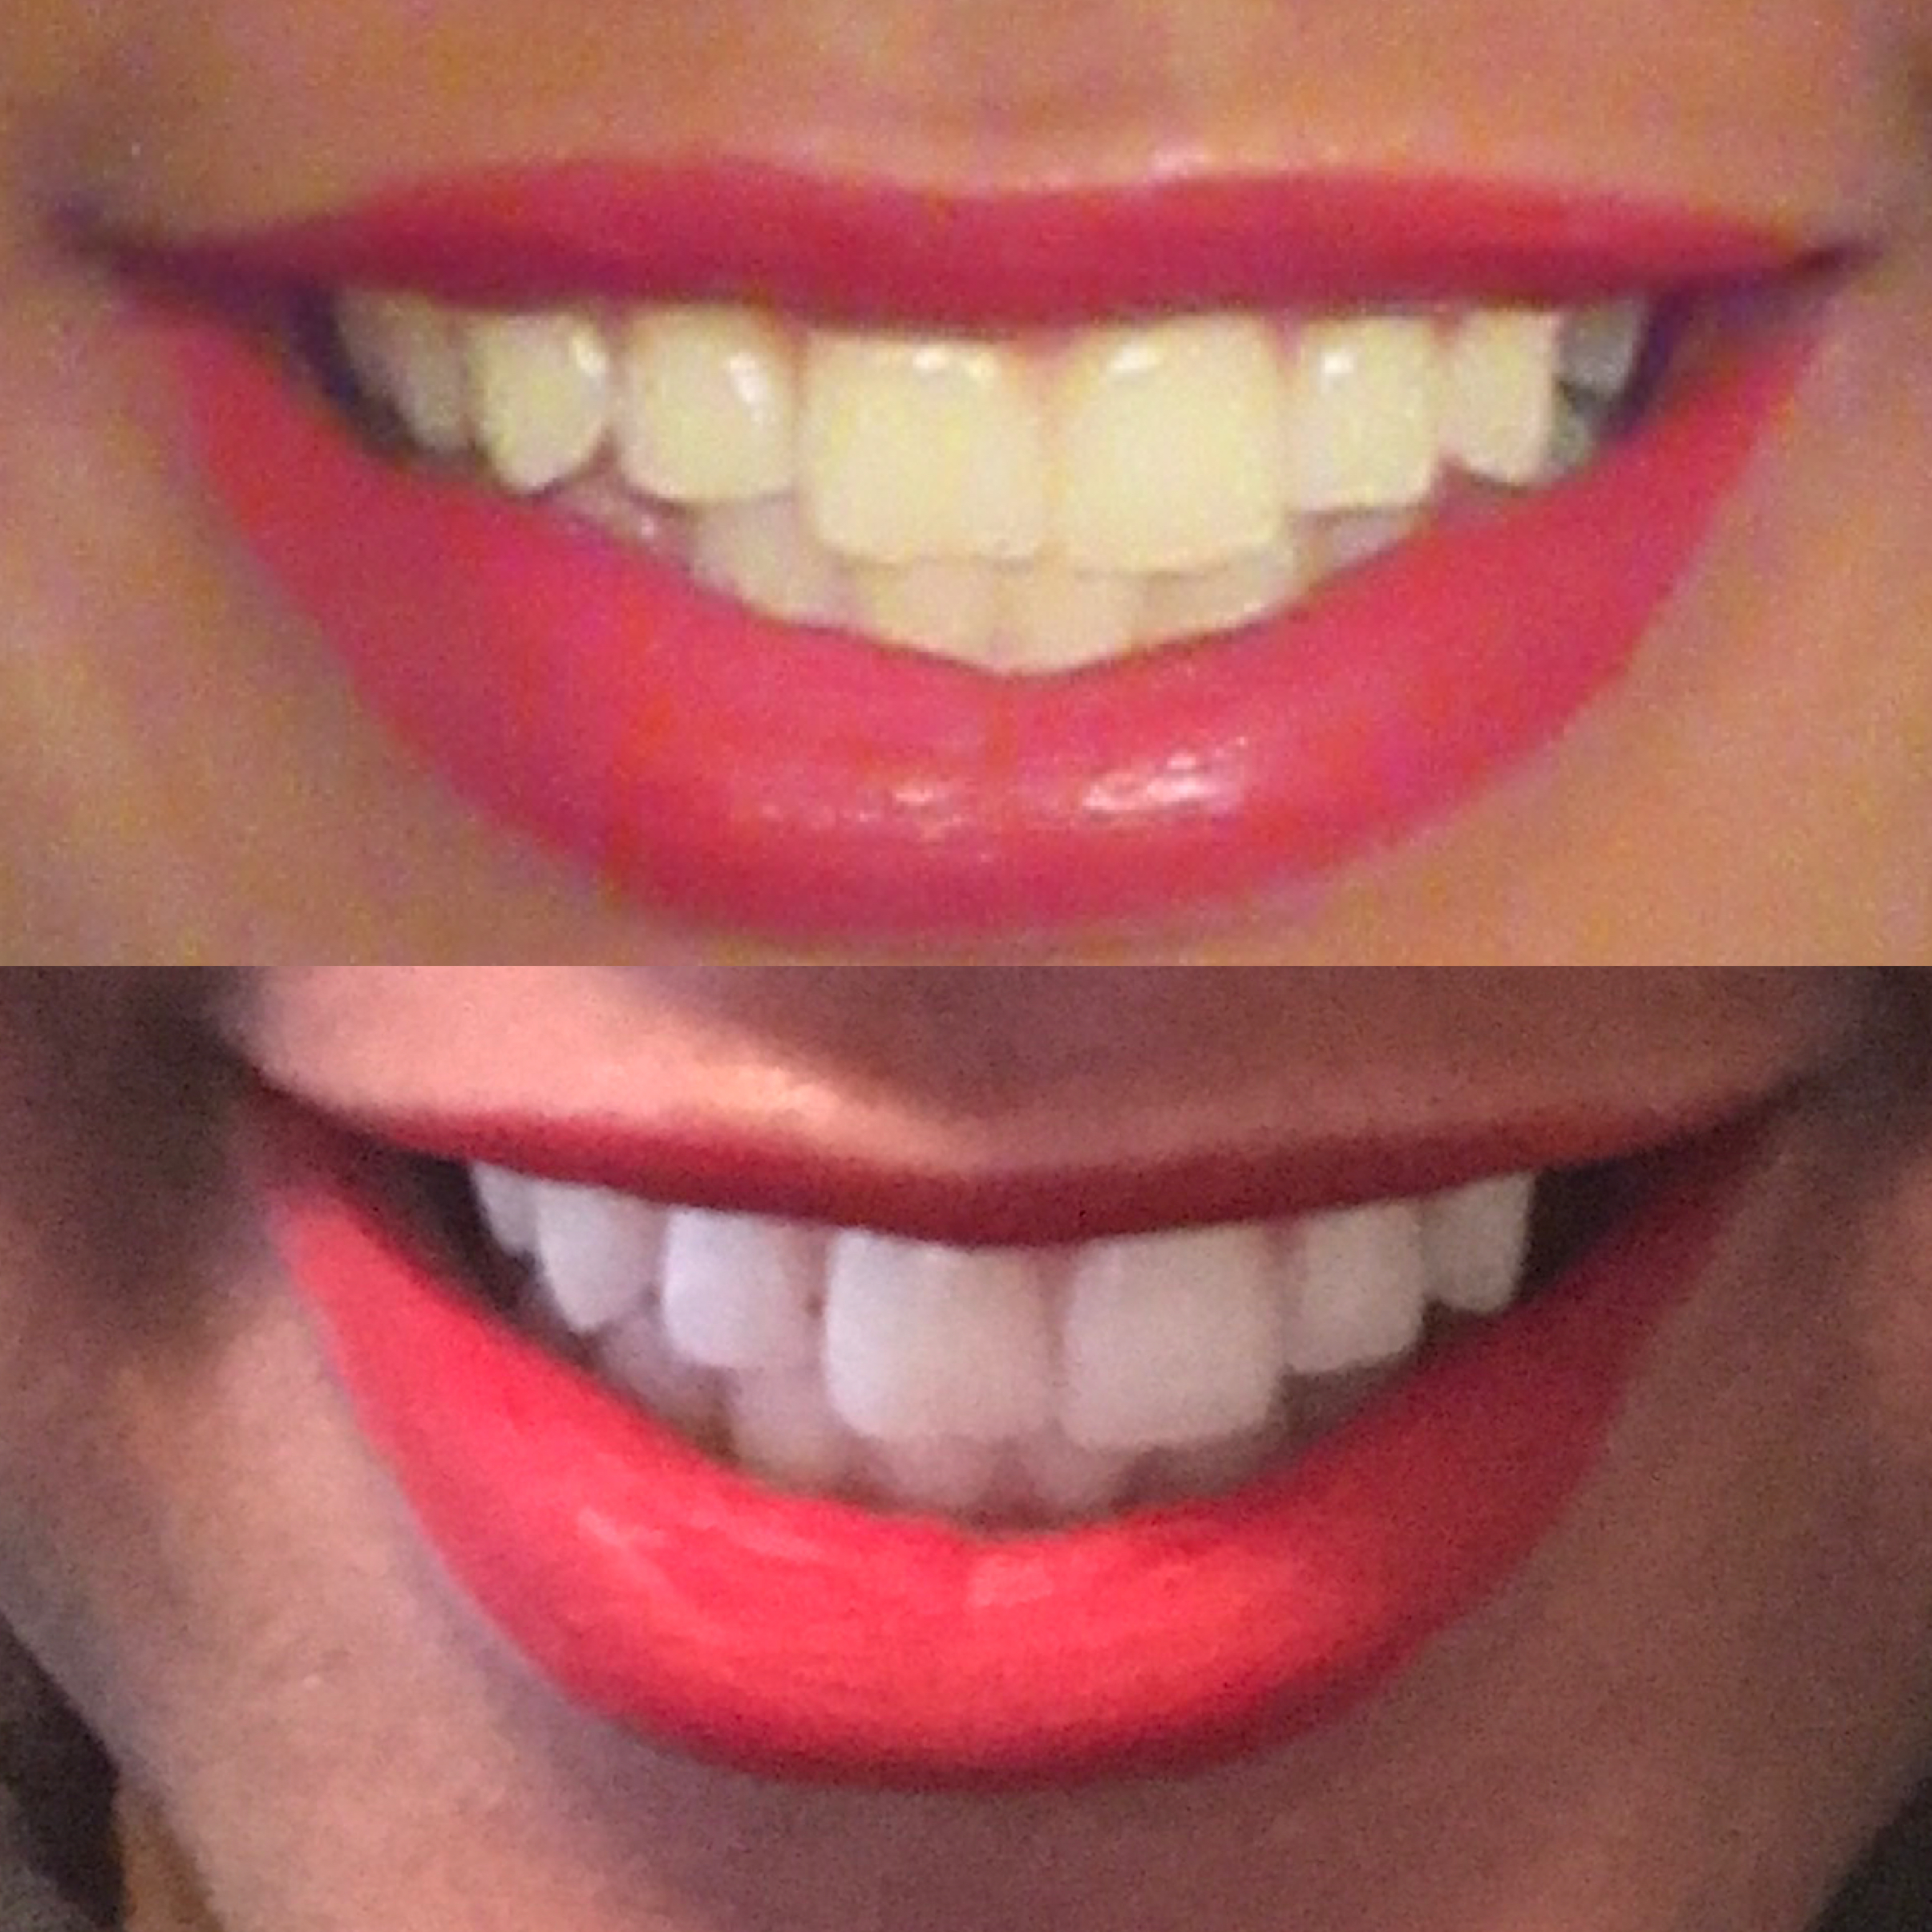 before and after teeth whitening pictures, Teeth Whitening Giveaway, custom fitted teeth whitening trays, Sensitive teeth, tooth desensitizing gel ingredients, Teeth sensitivity, teeth whitener, teeth whitening kit, coffee stained teeth, does coffee stain your teeth, how to remove stains from teeth, professional teeth whitening, custom teeth whitening trays, dentist teeth whitening, whitening teeth at home, home teeth whitening, teeth whitening tray, teeth whitening gel, tobacco stains,